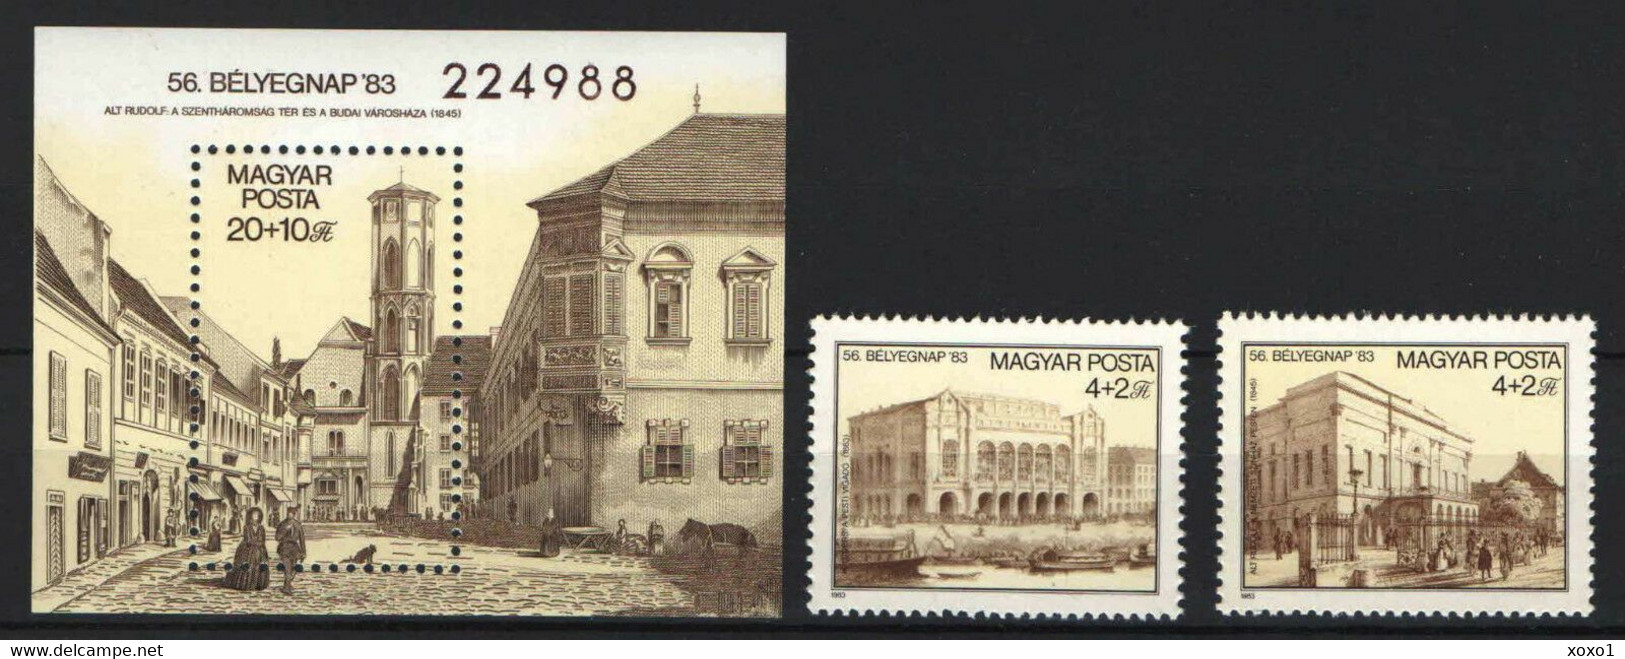 Hungary 1983 MiNr. 3632 - 3634(Block 166) Ungarn Philately Stamp's Day, Architecture, Engraving 2v + S\sh MNH ** 7.40 € - Engravings